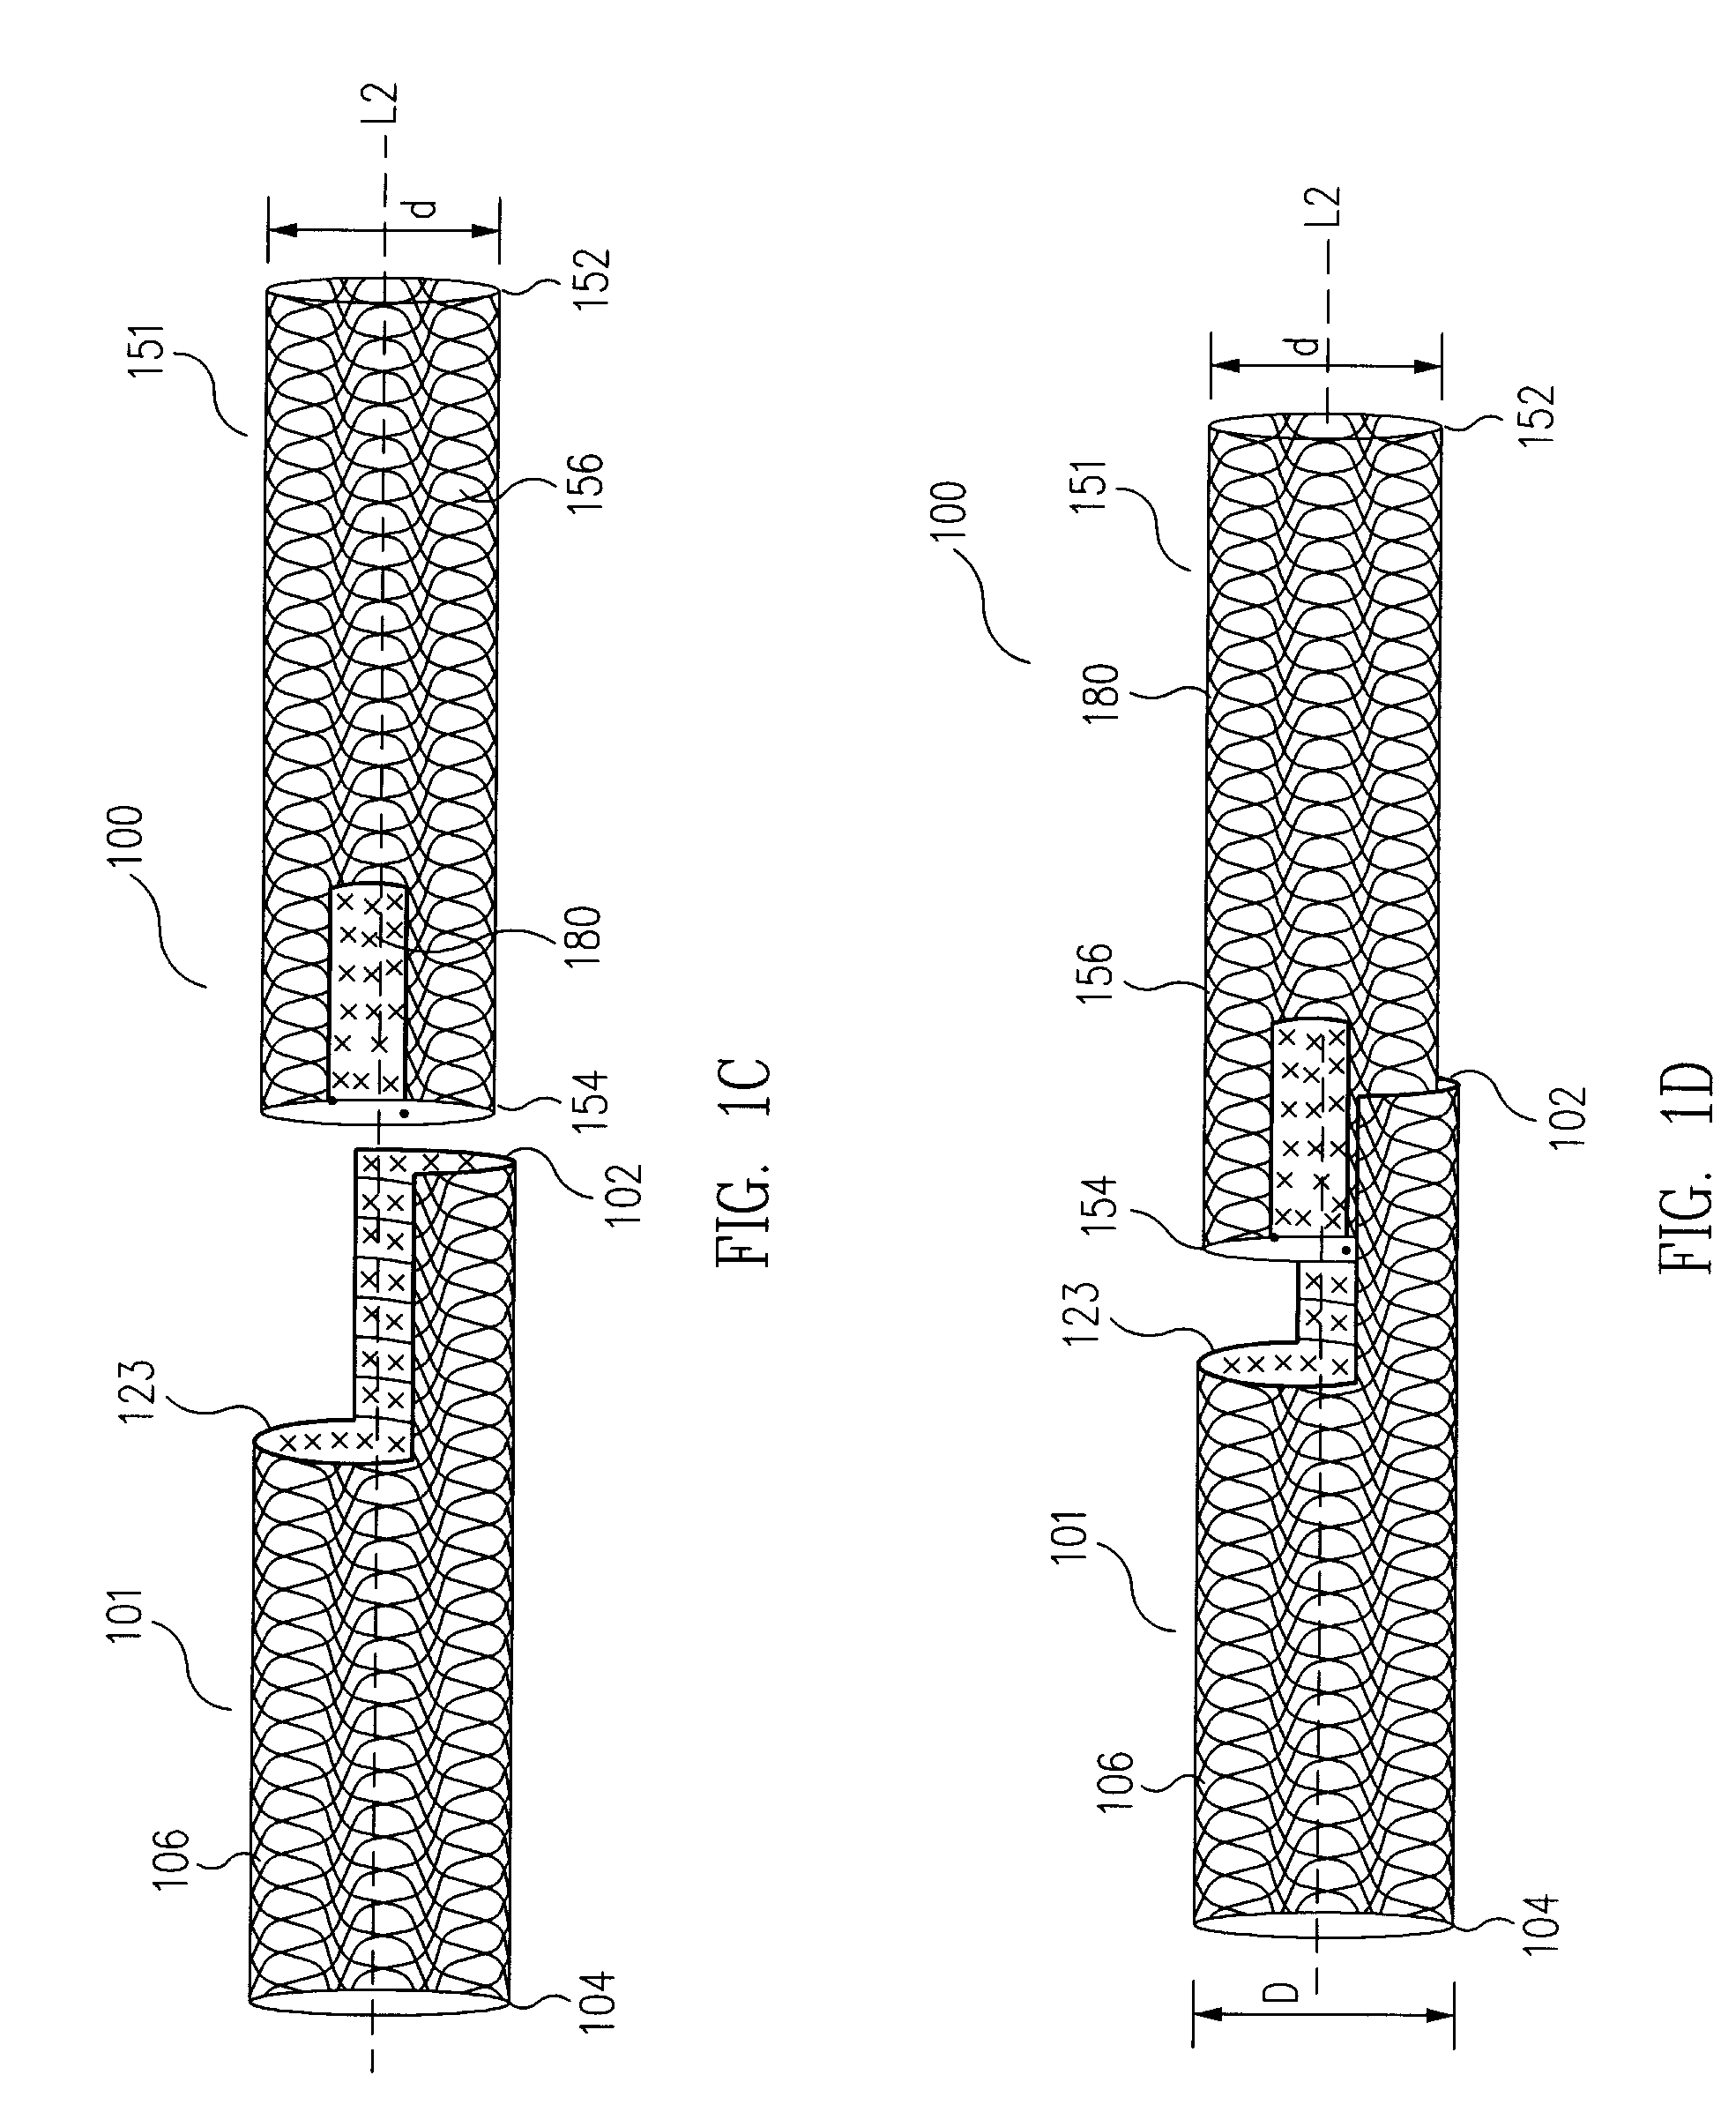 Universal Modular Stent Graft Assembly to Accommodate Flow to Collateral Branches